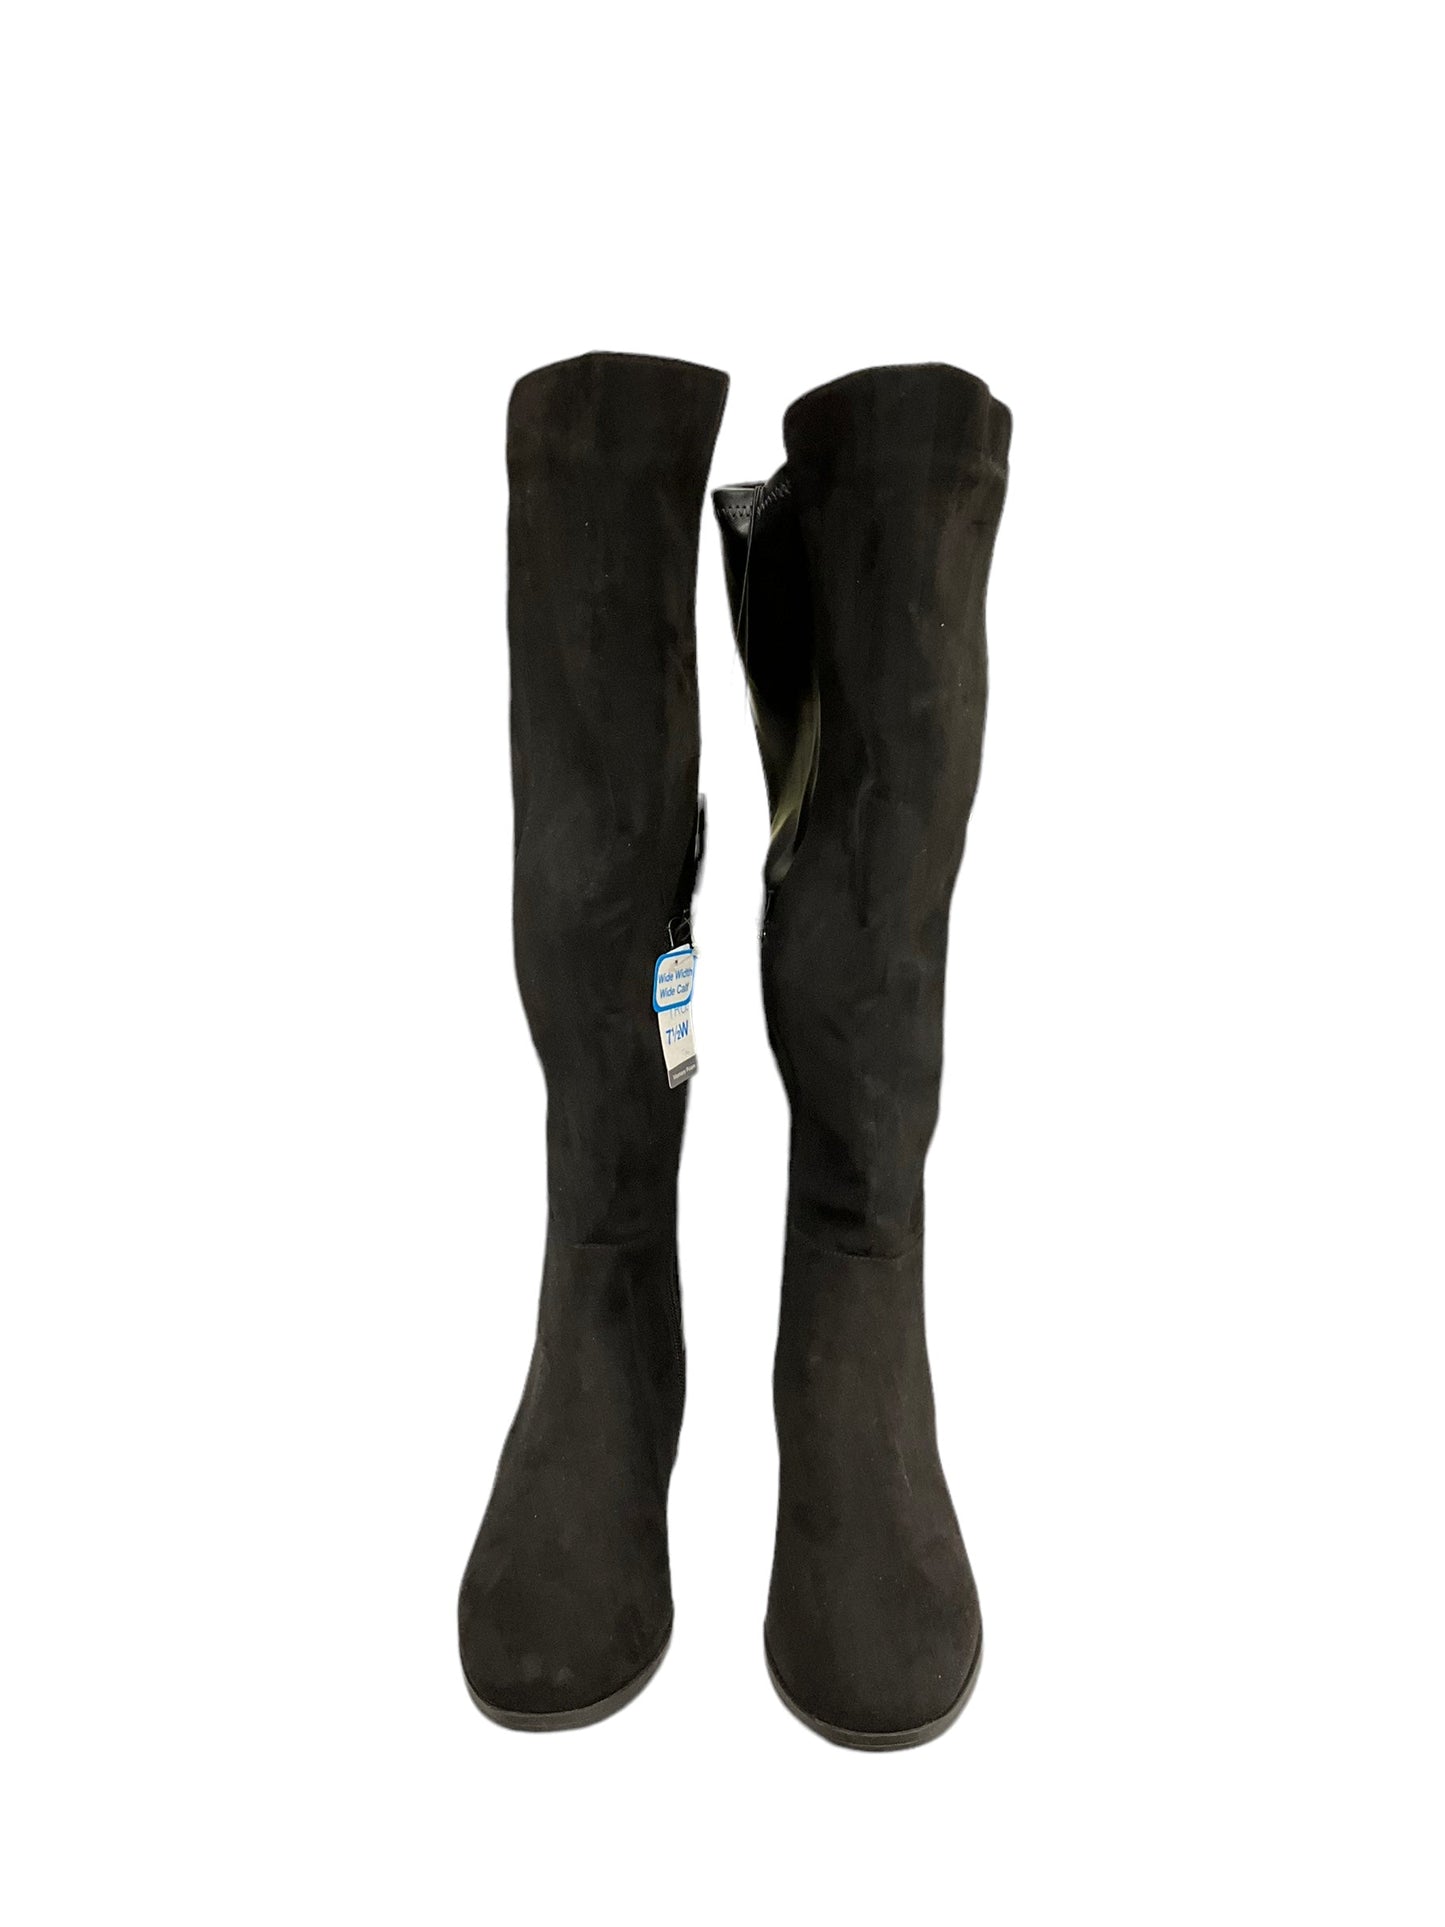 Black Boots Mid-calf Flats Time And Tru, Size 7.5